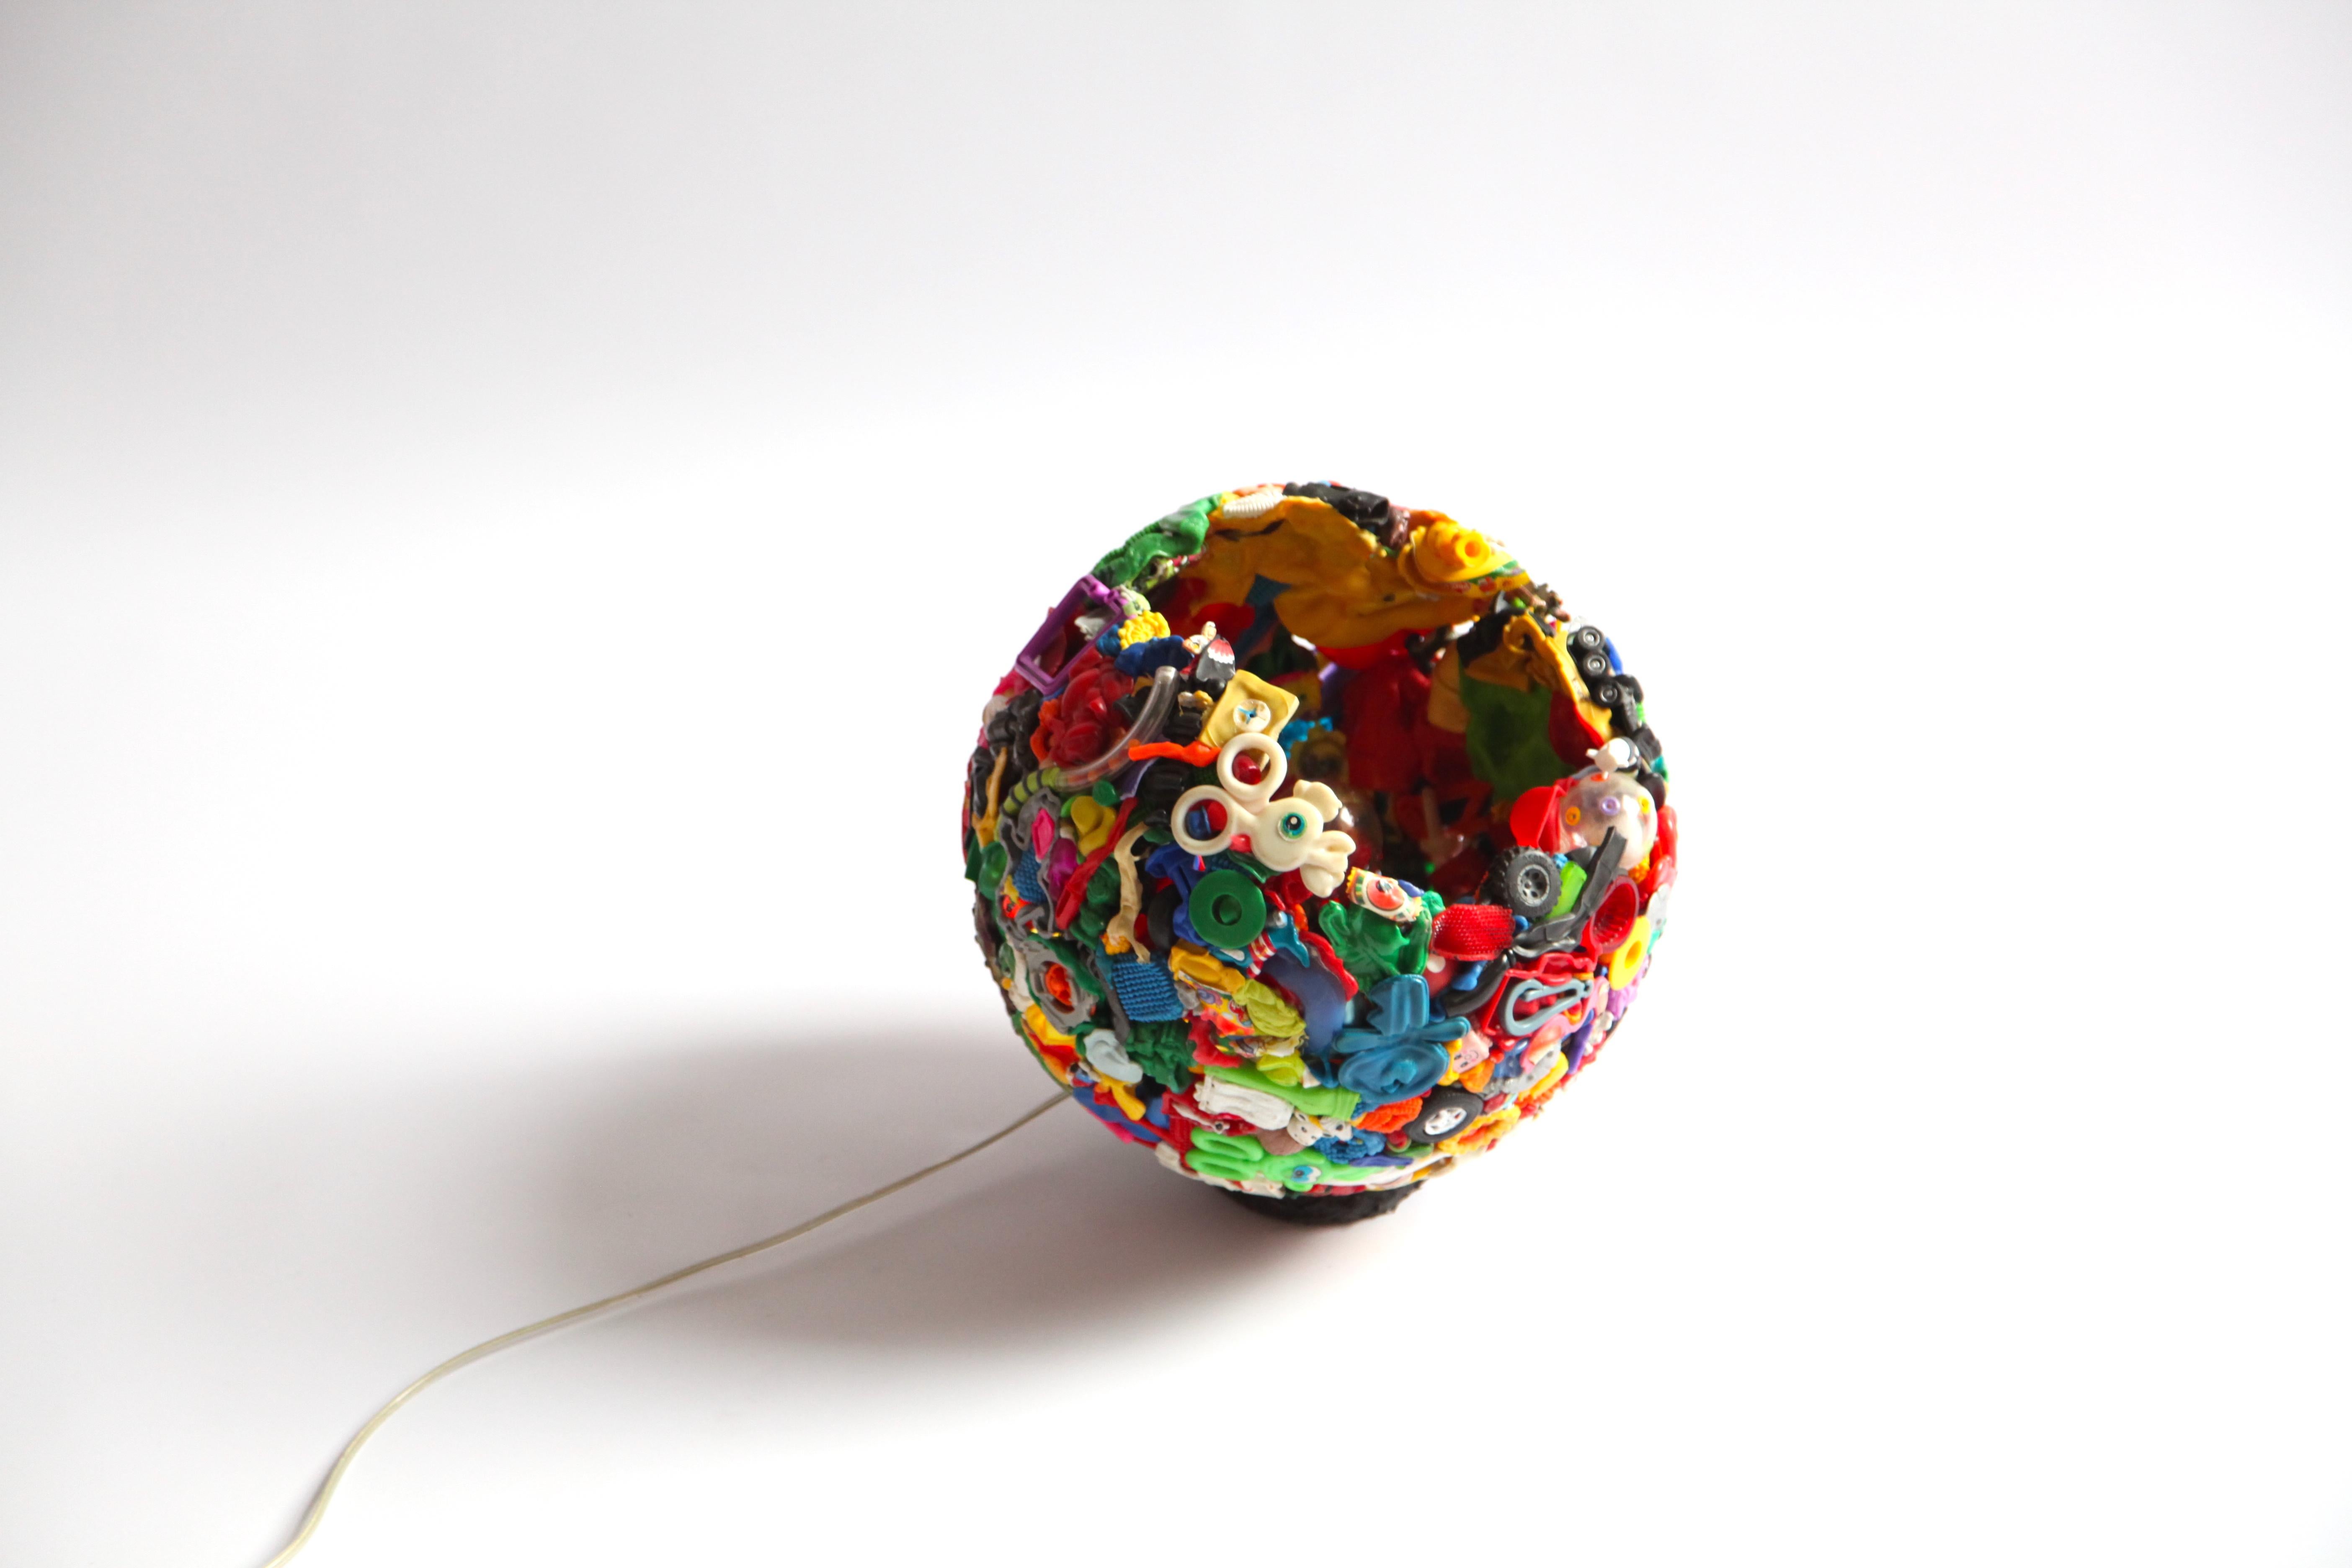 A one of a kind unique lamp, made in 1999. Richard Hutten used ready mades and plastic toy wased to create a new object. 

Already then he was engaged to sustainability and circularity.

The Meltingpot was only showcased at a few places and